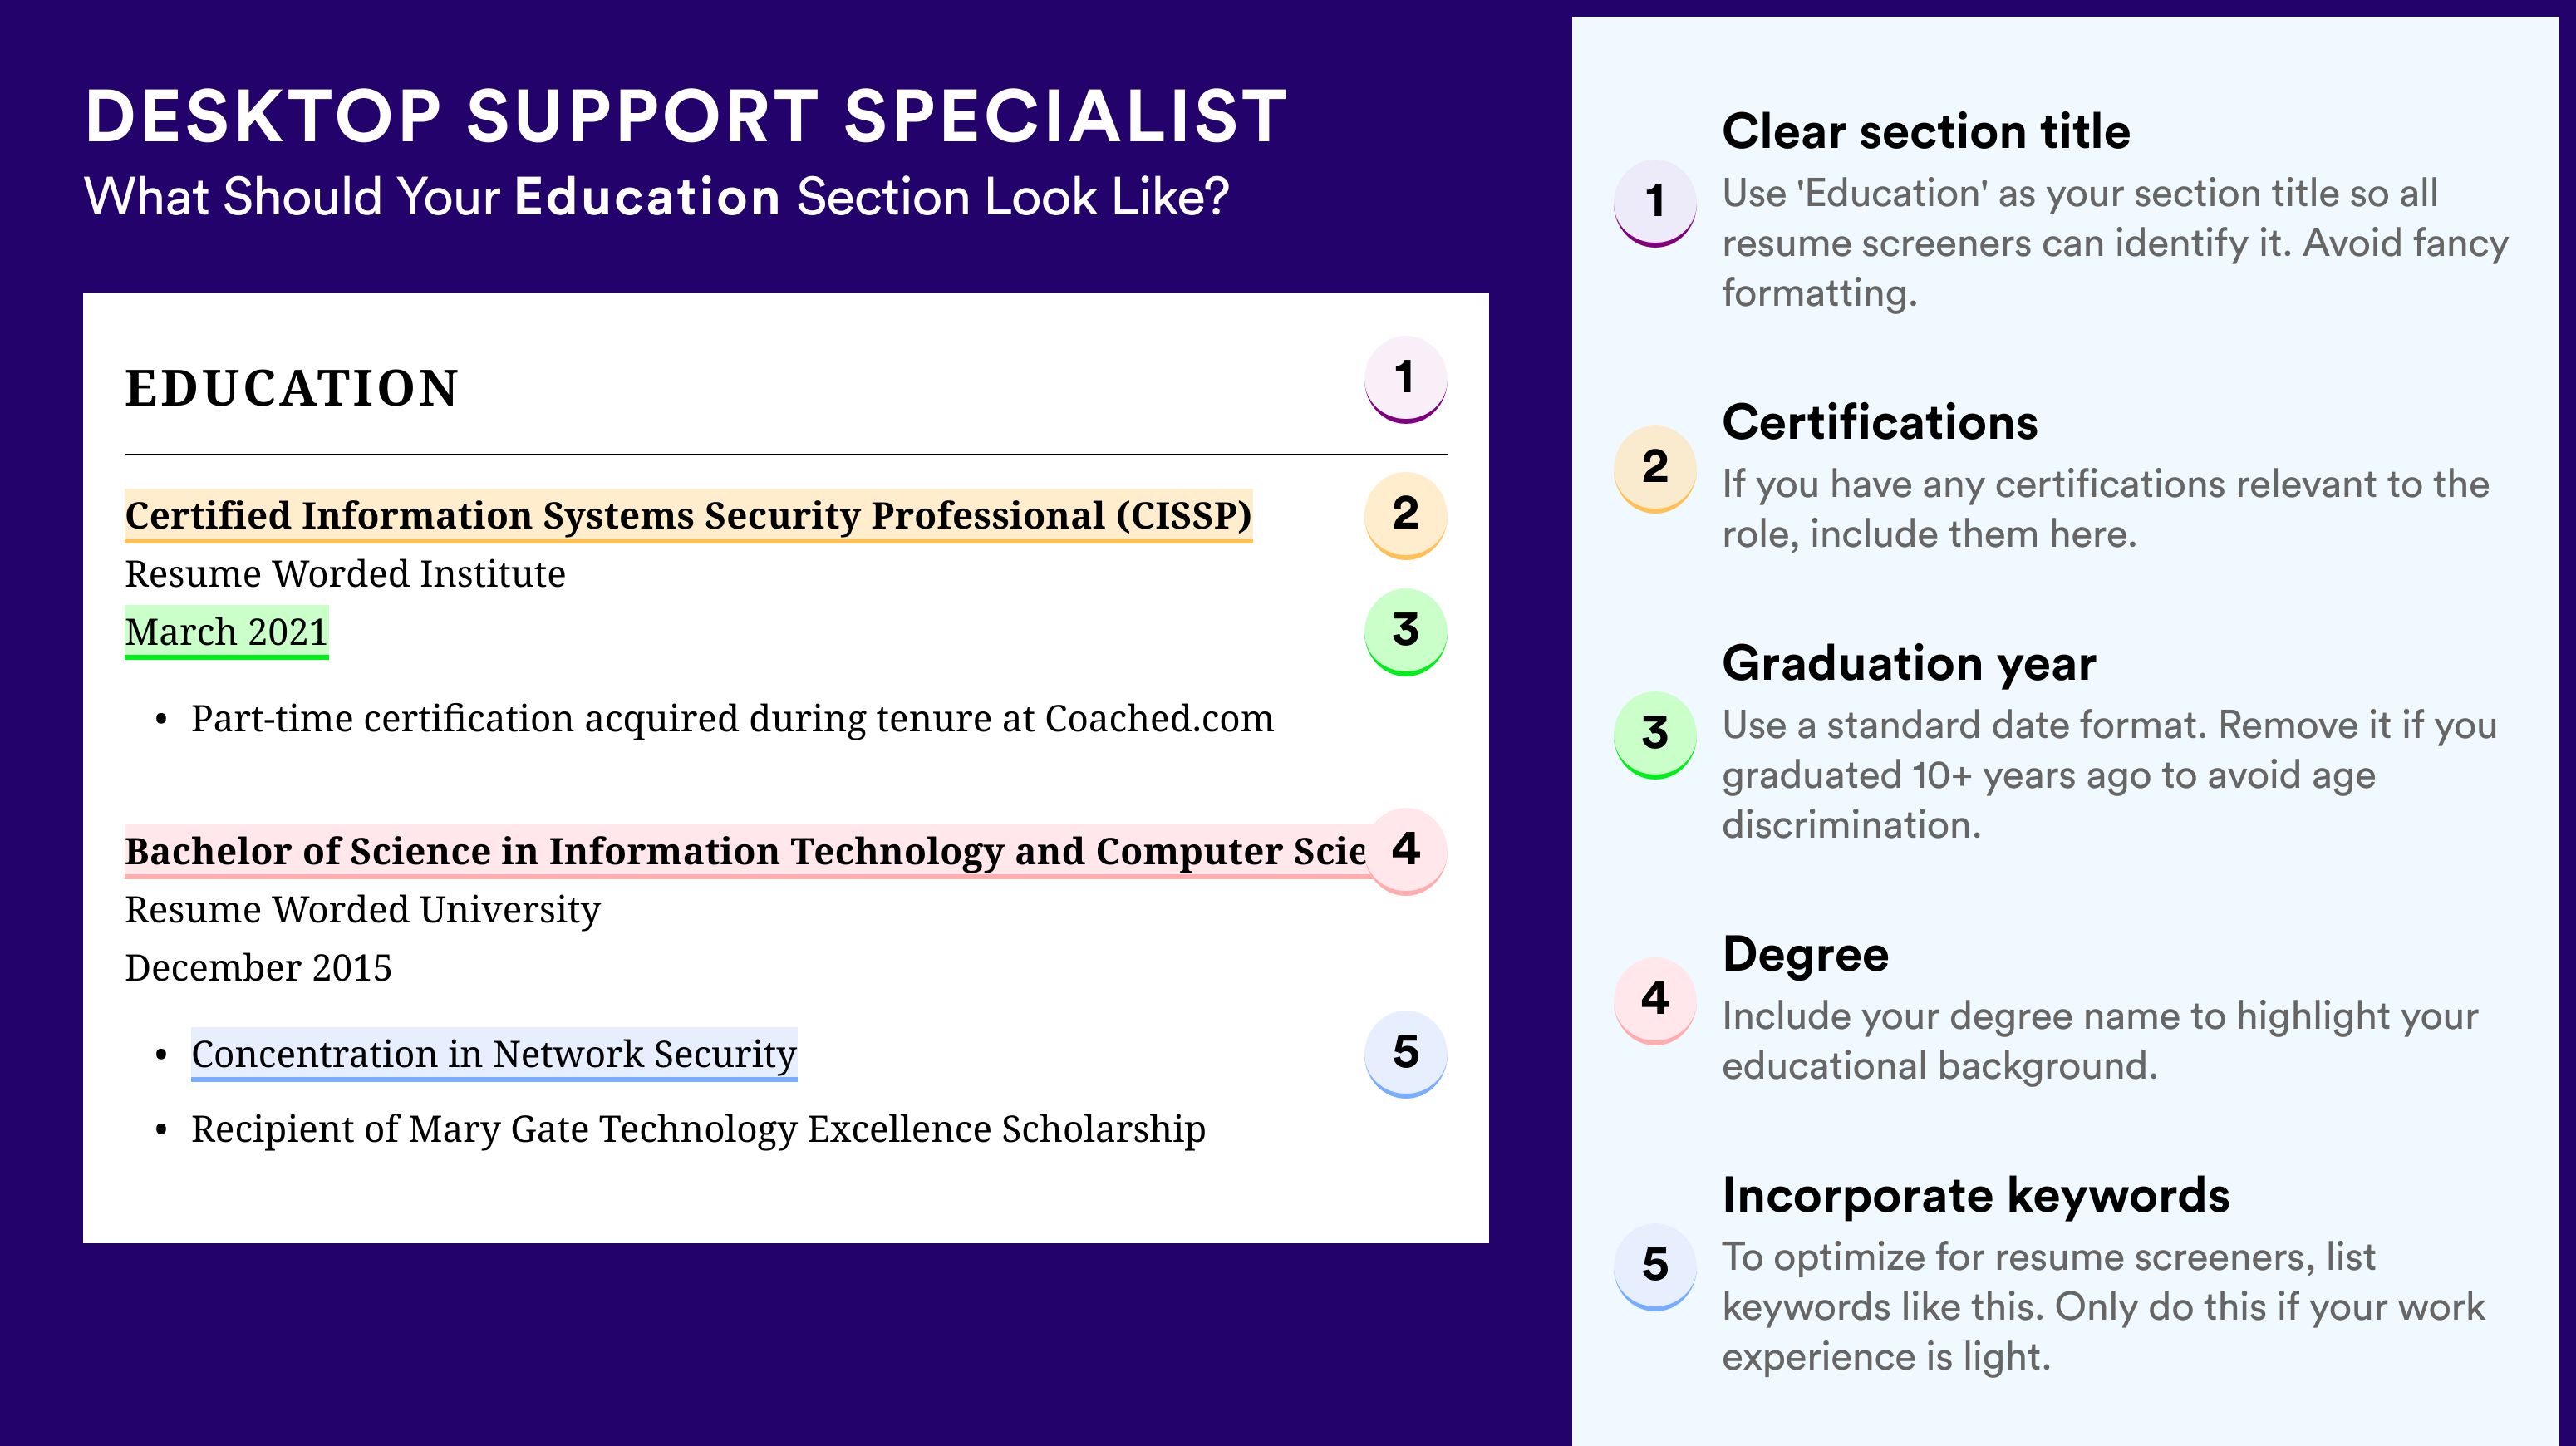 How To Write An Education Section - Desktop Support Specialist Roles